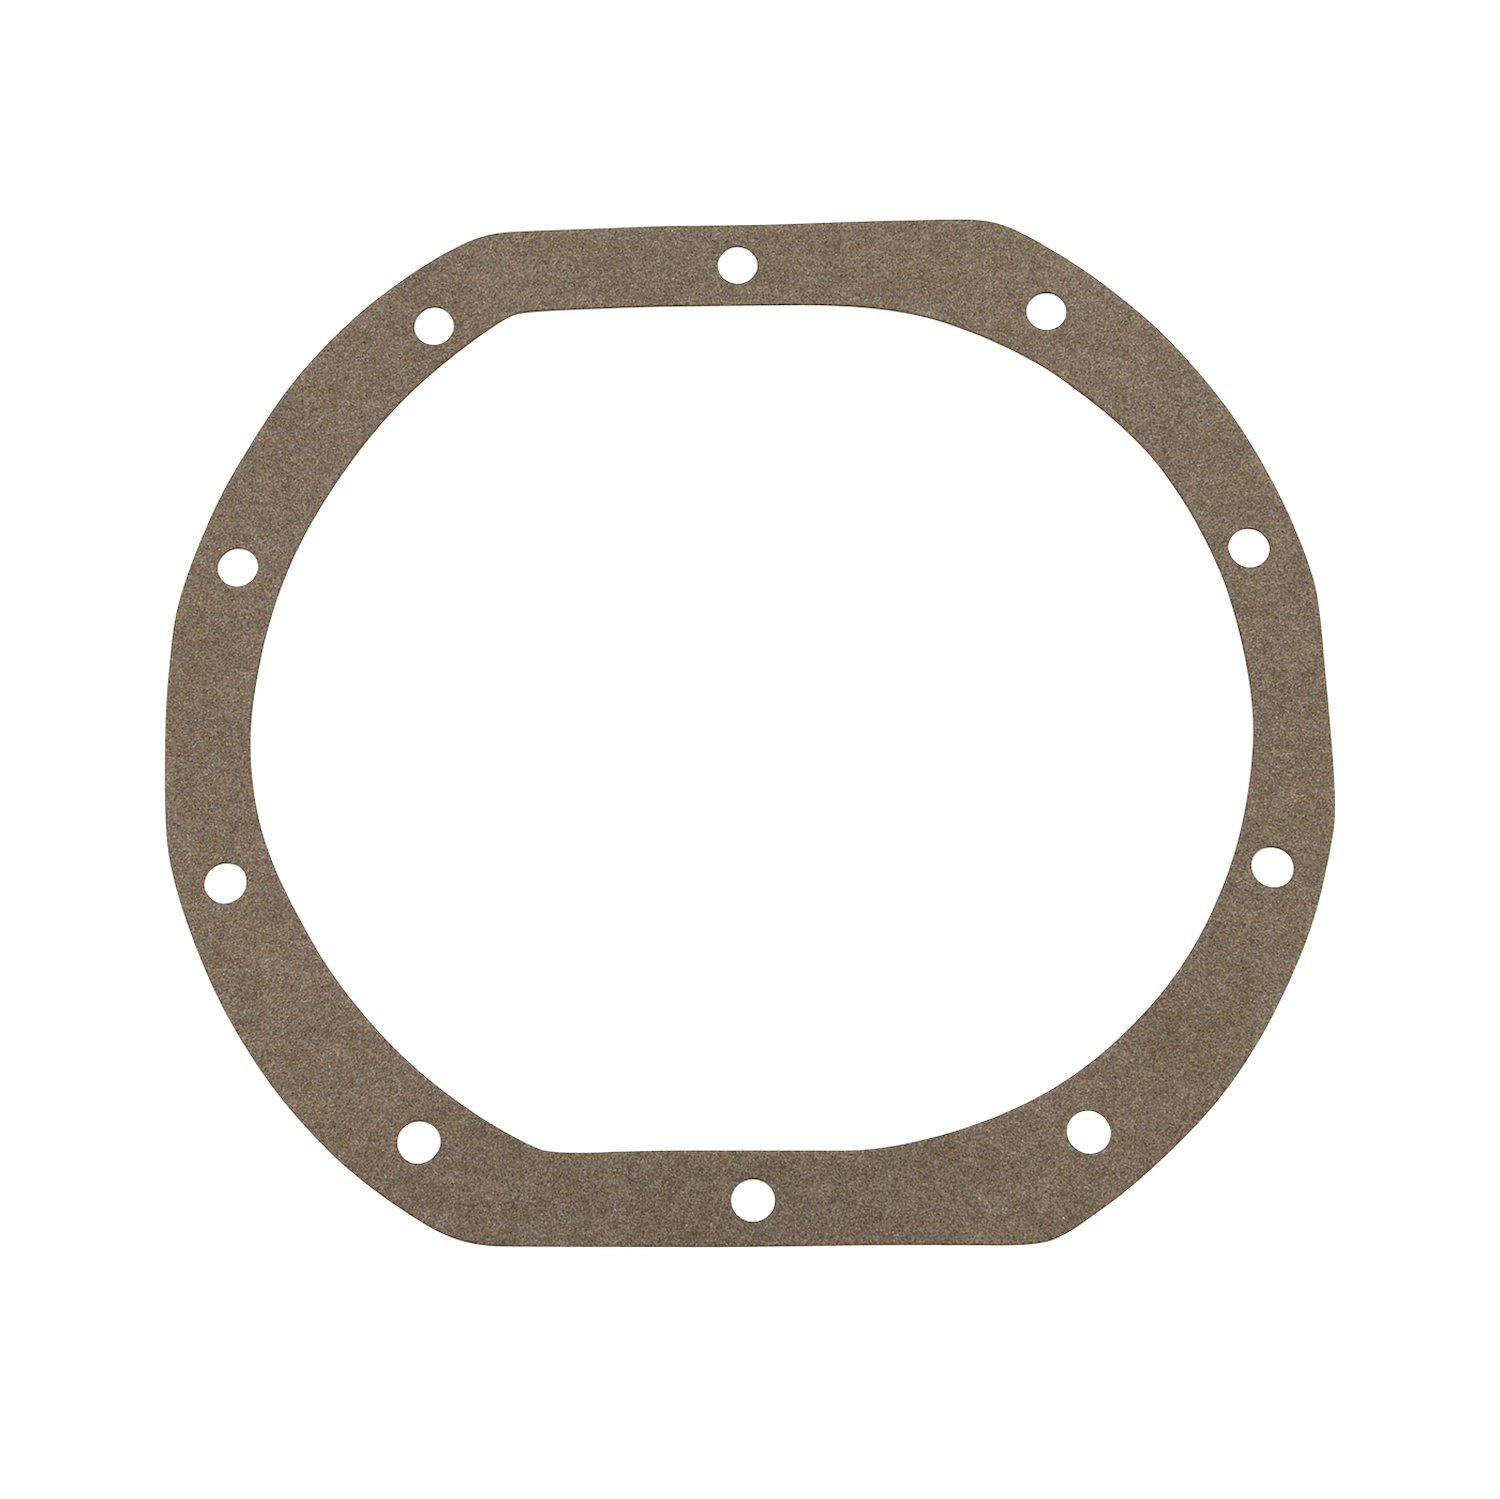 8 in. Dropout Housing Gasket.